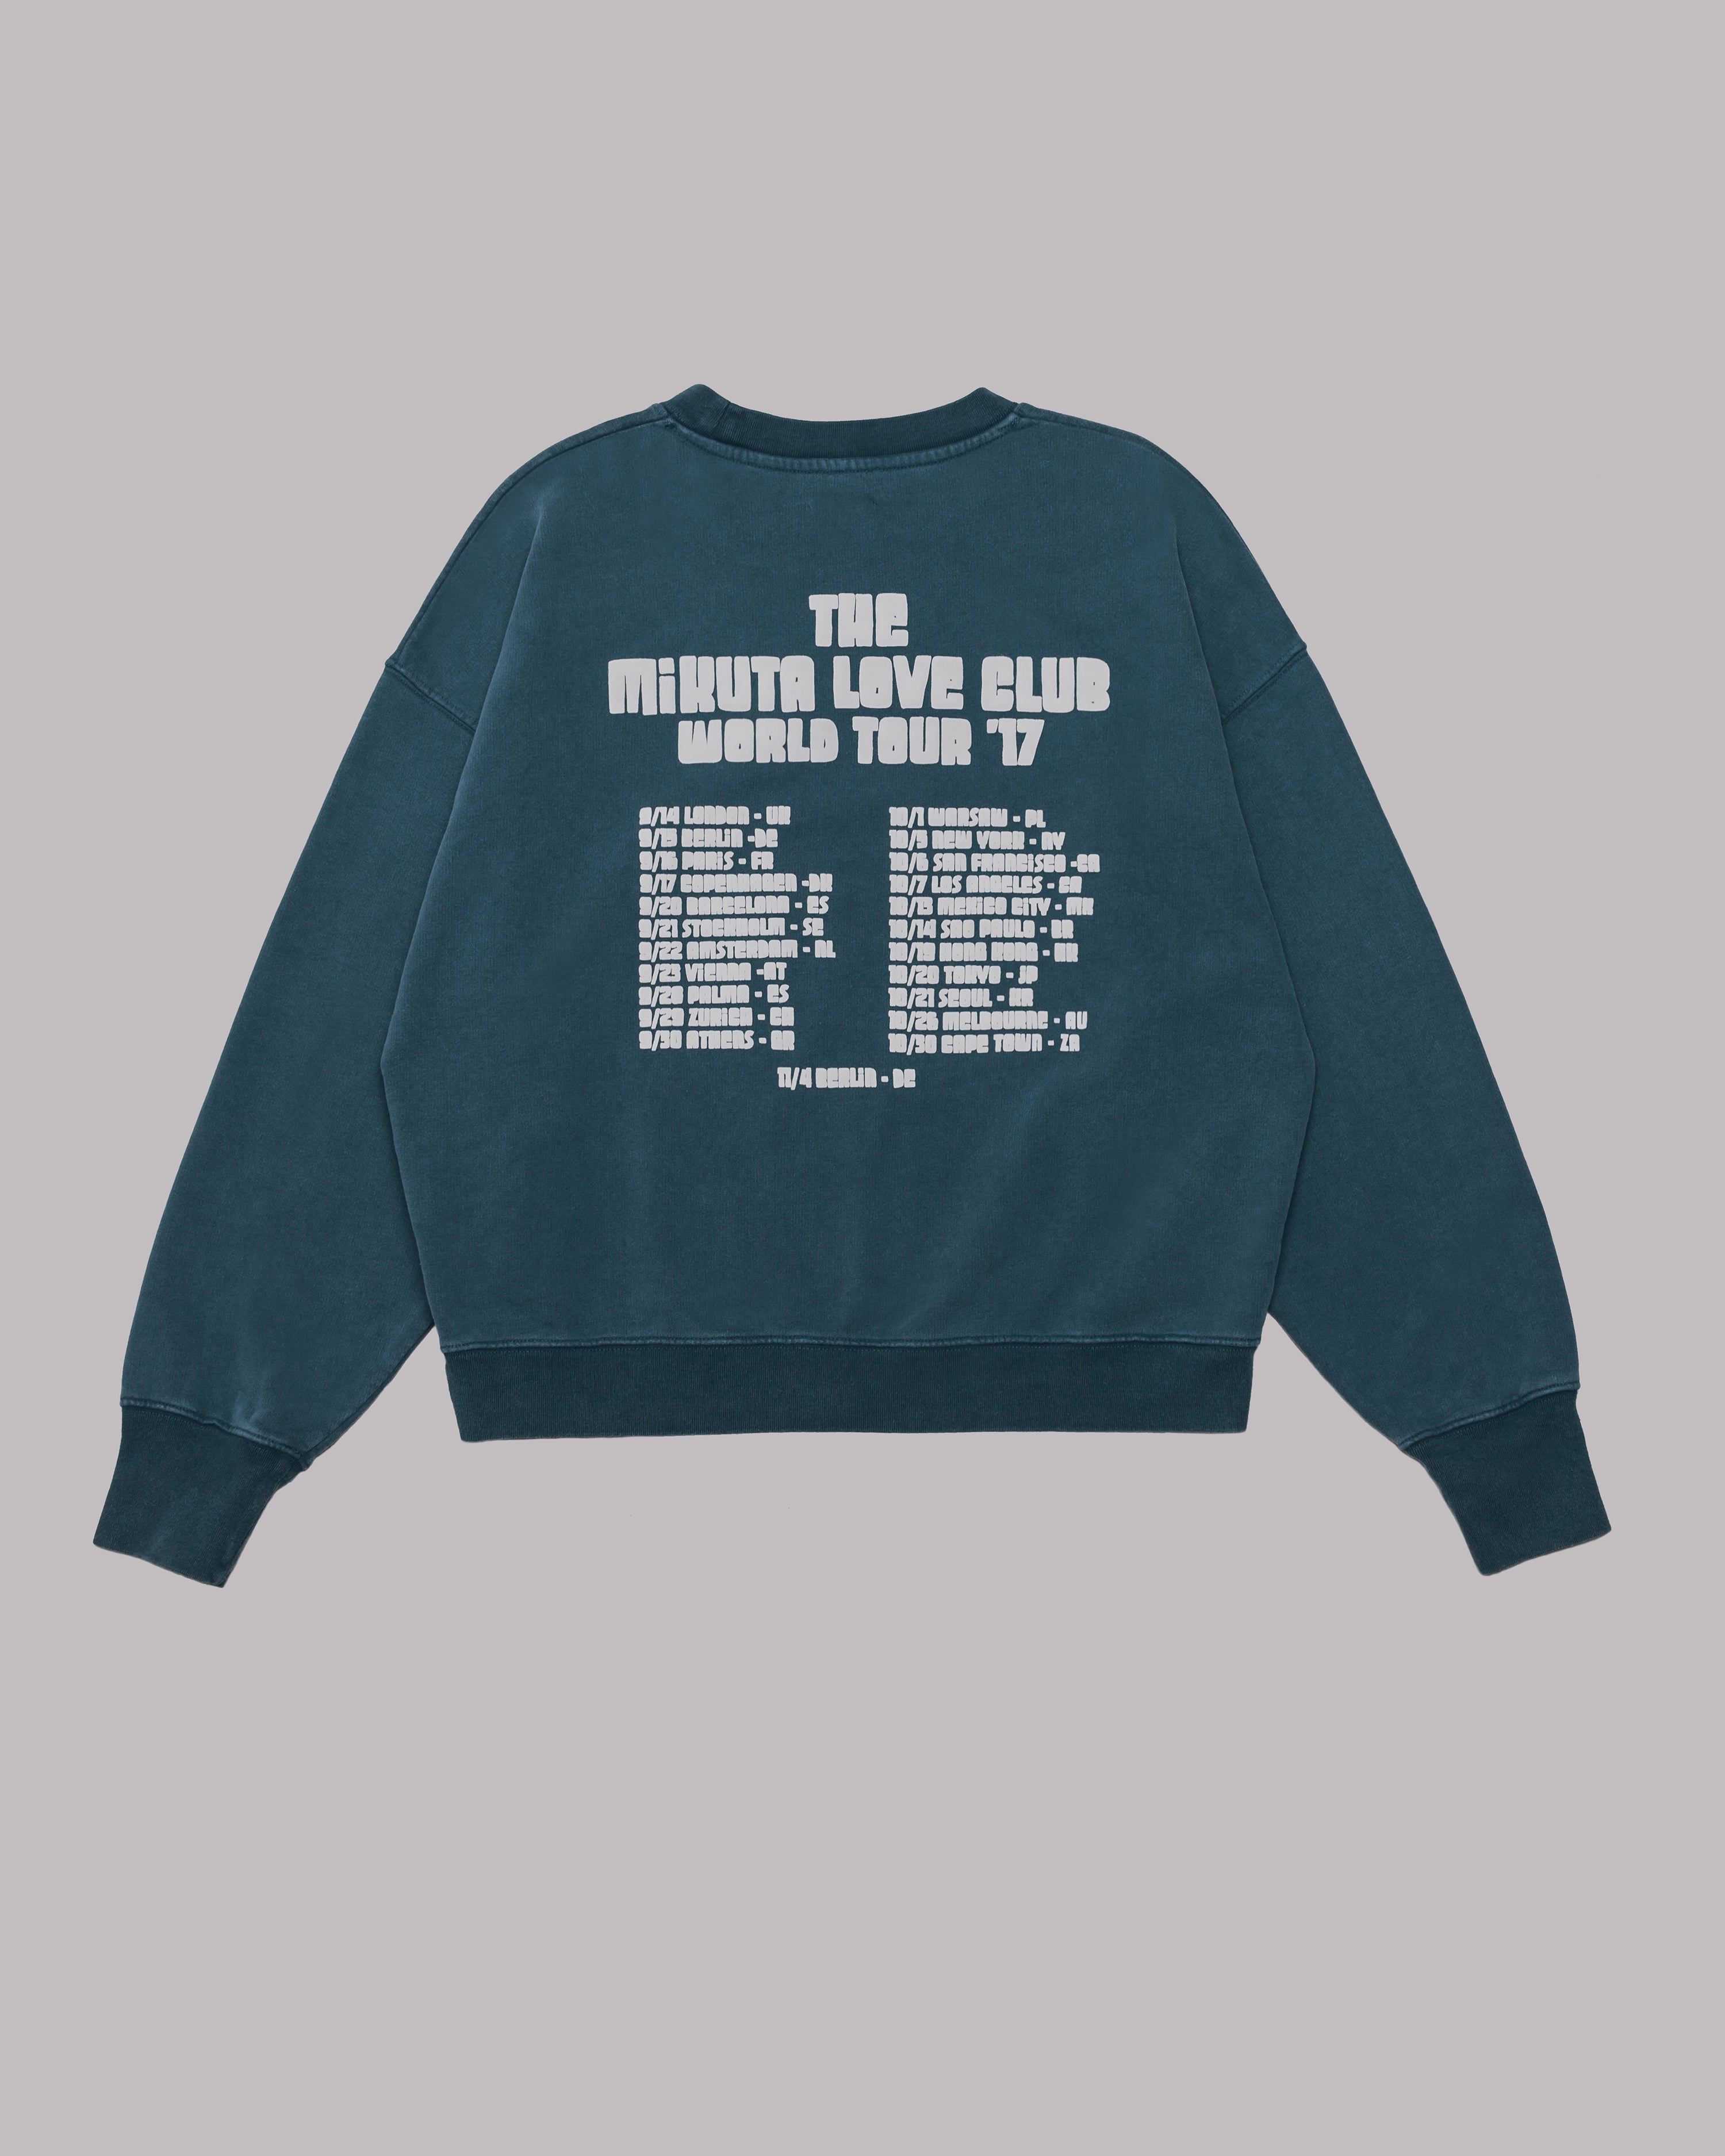 The Teal Tour Base Sweater